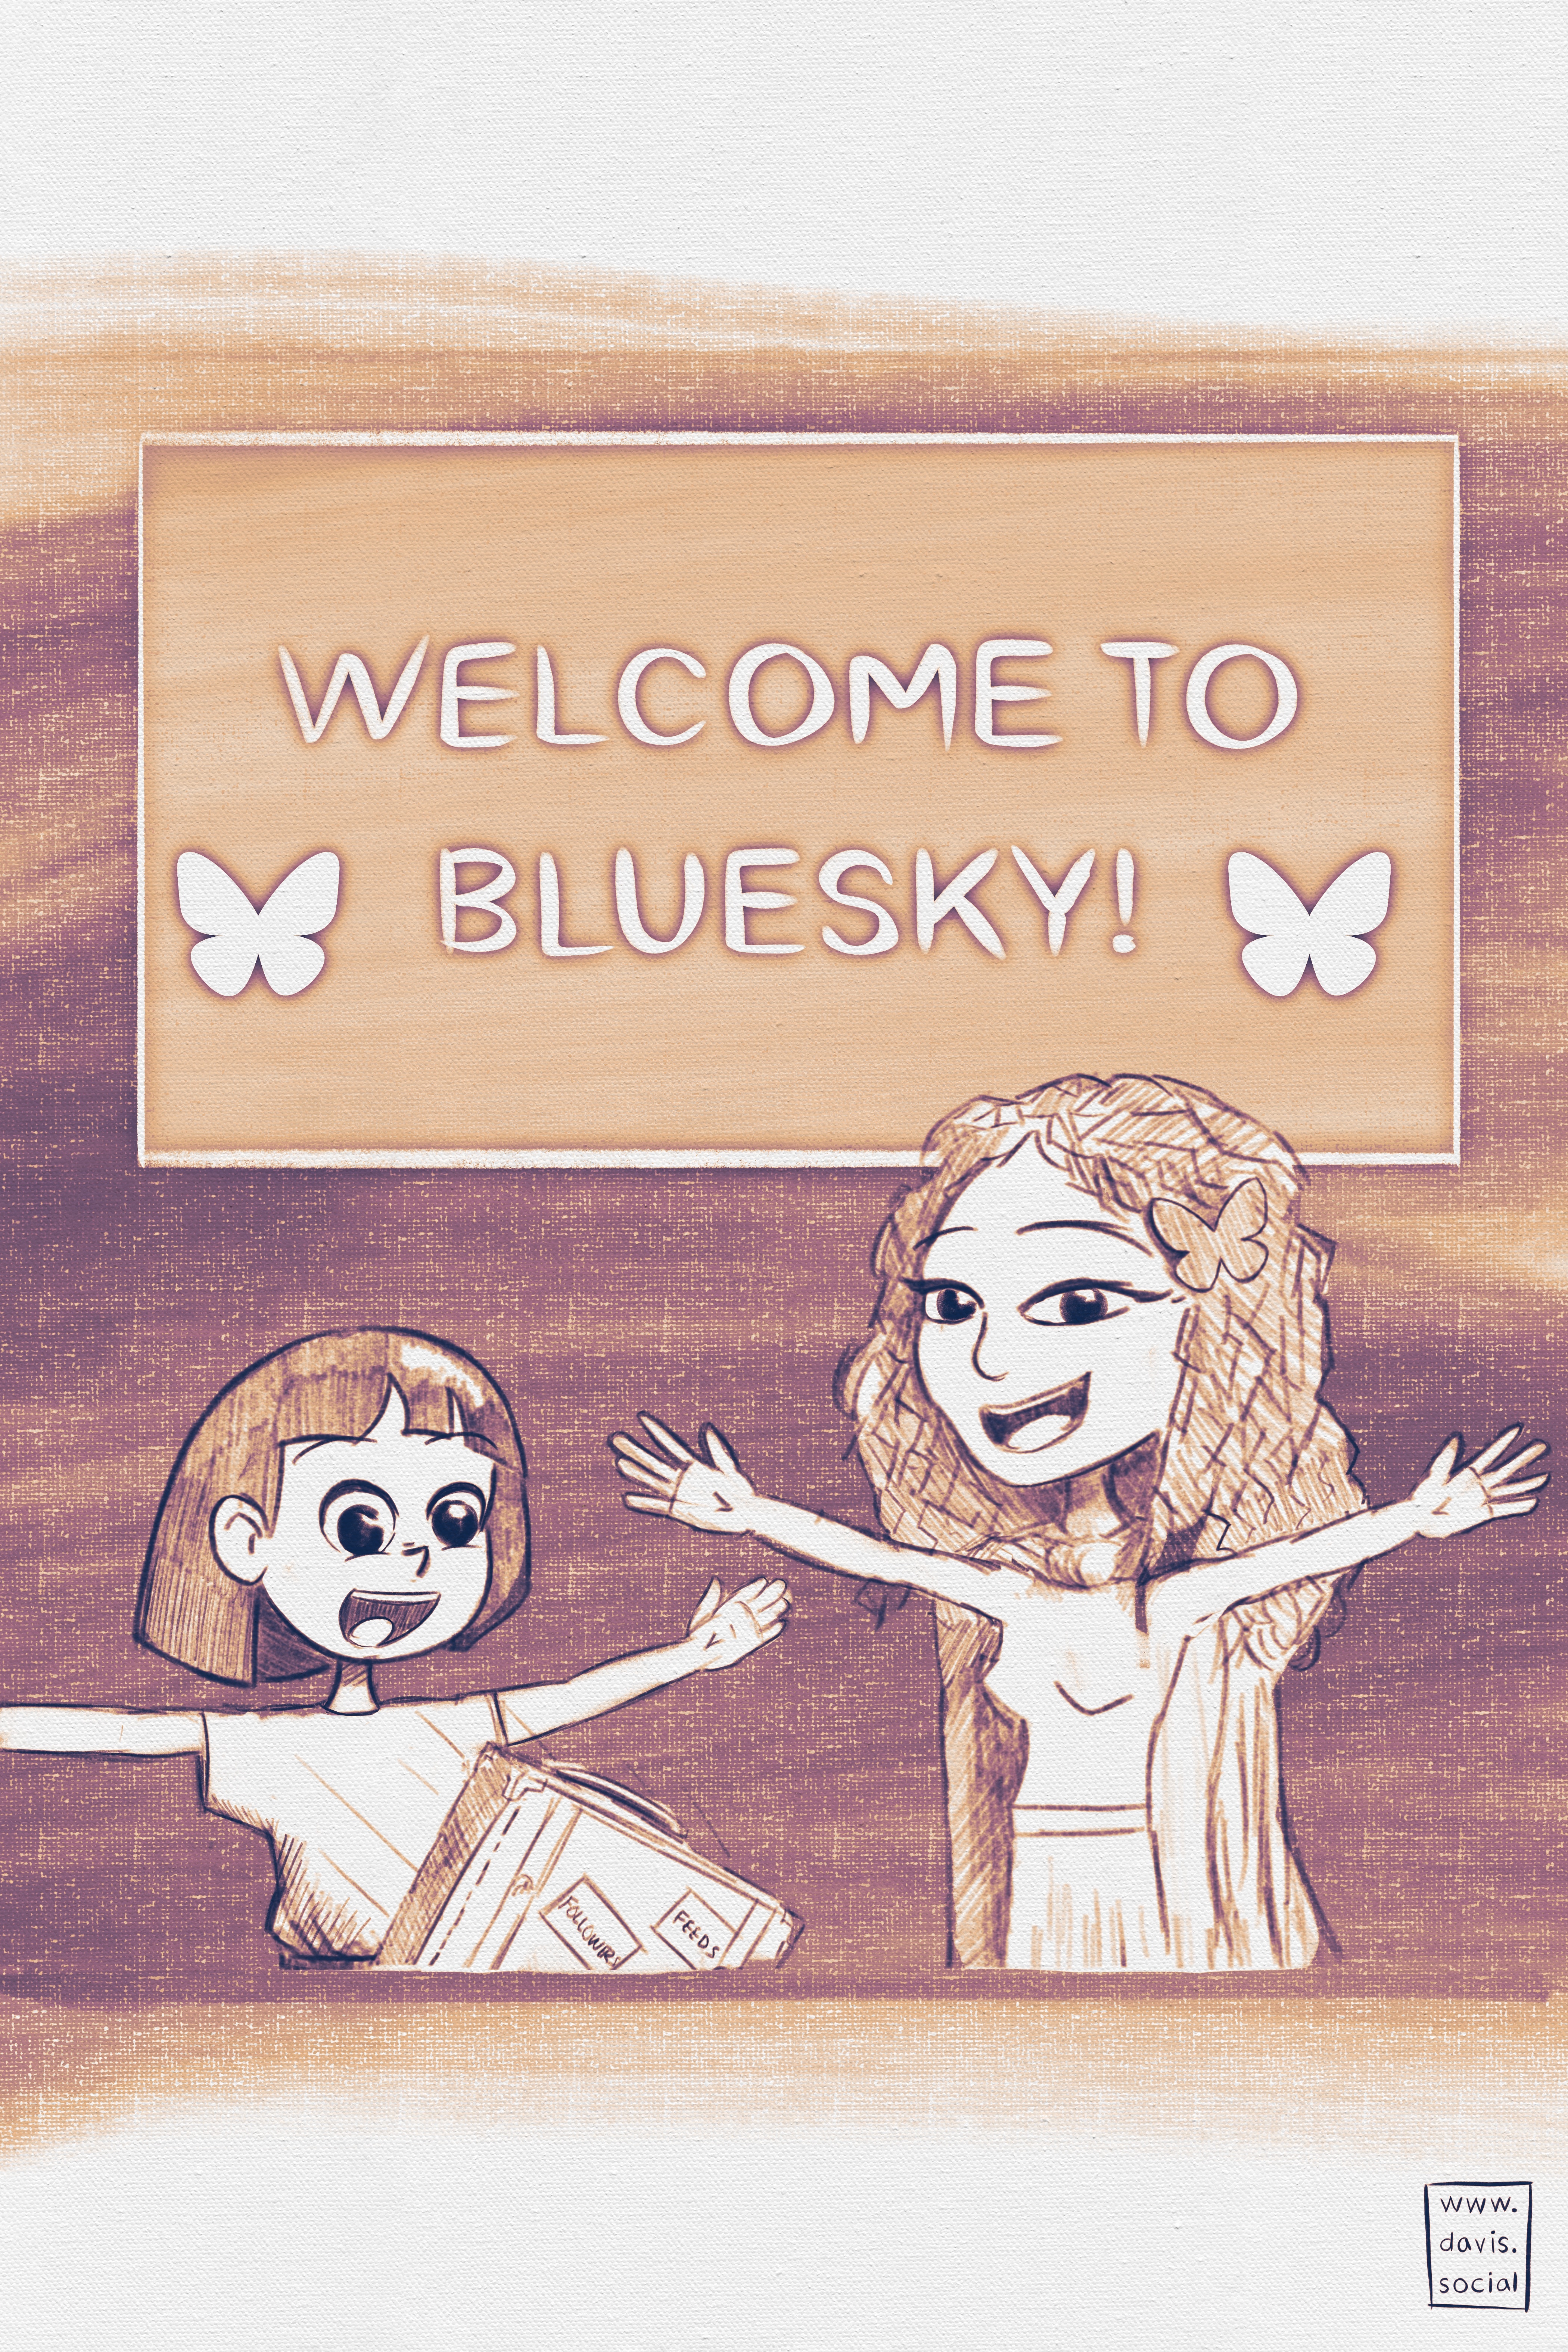 Two characters smile excitedly, with their arms raised. The top of the image says 'Welcome to Bluesky!'